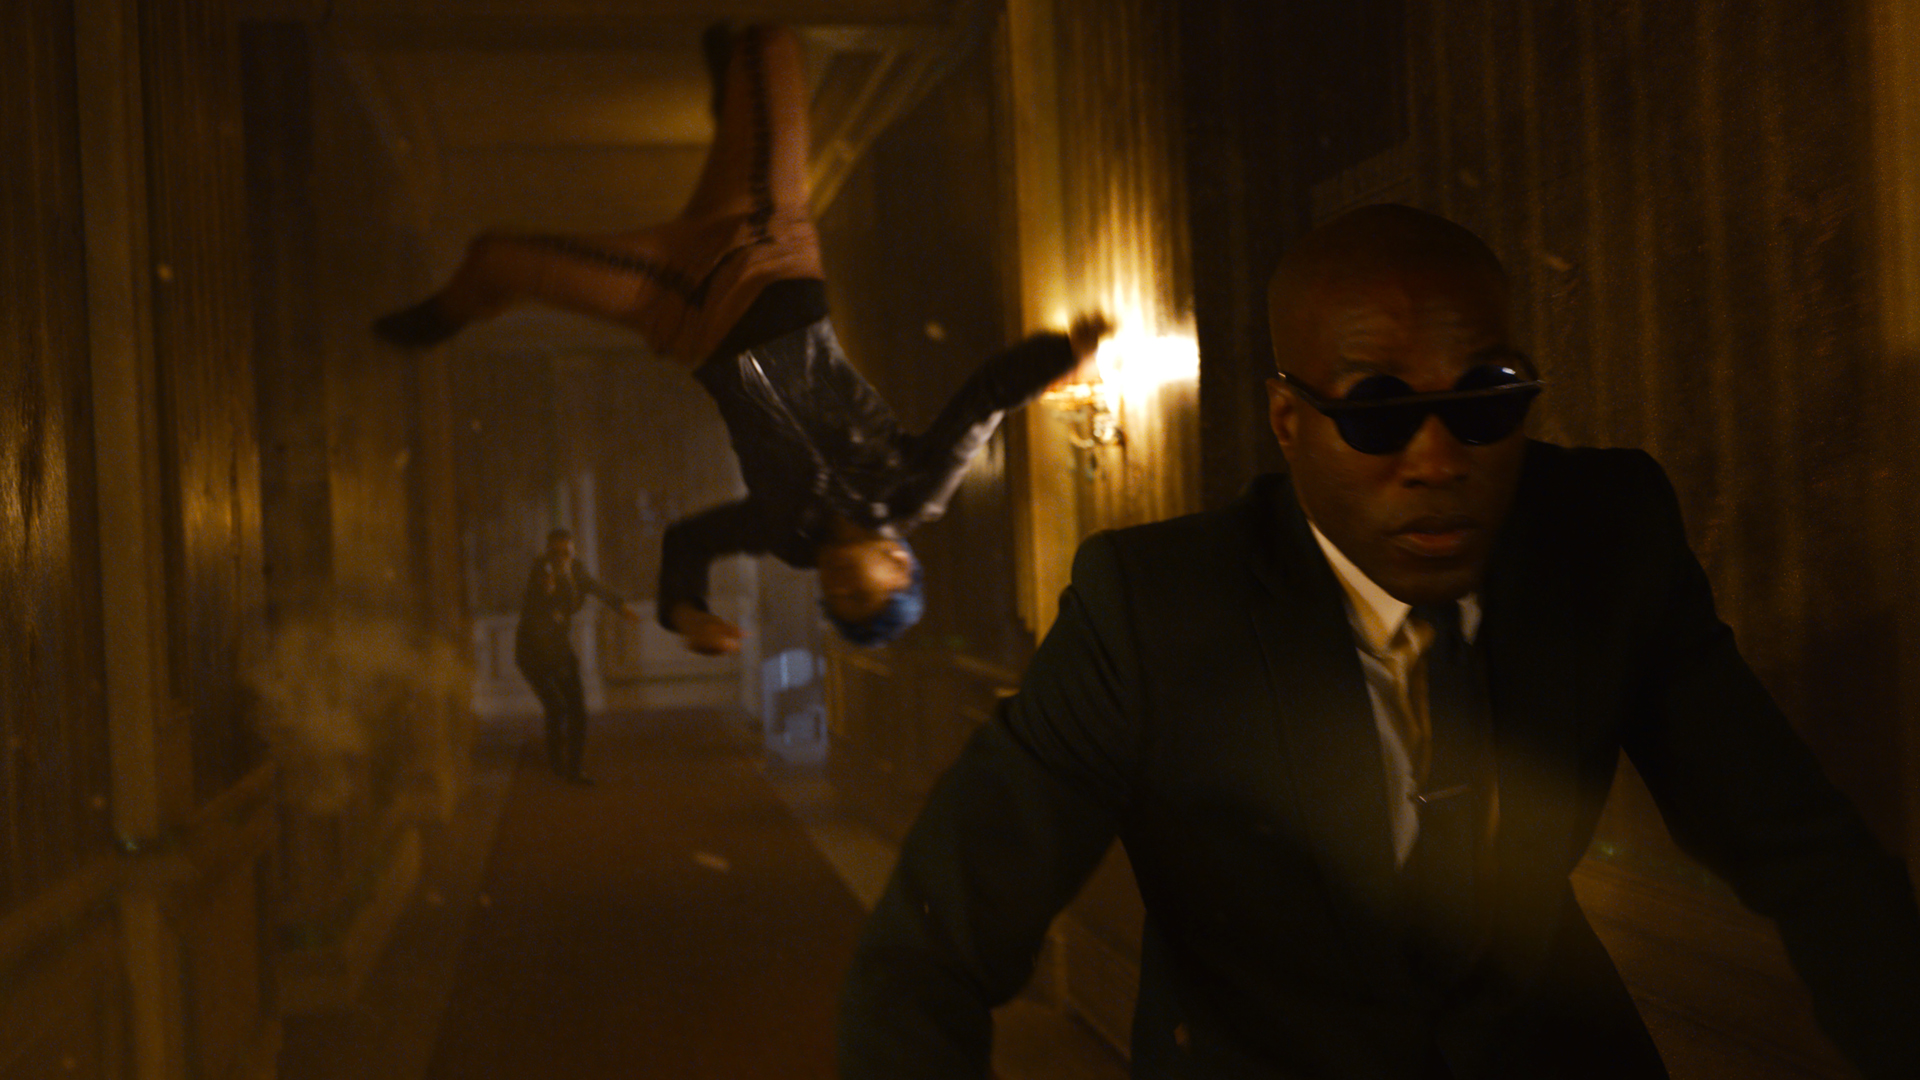 Bugs protects Morpheus from the Agents in The Matrix Resurrections